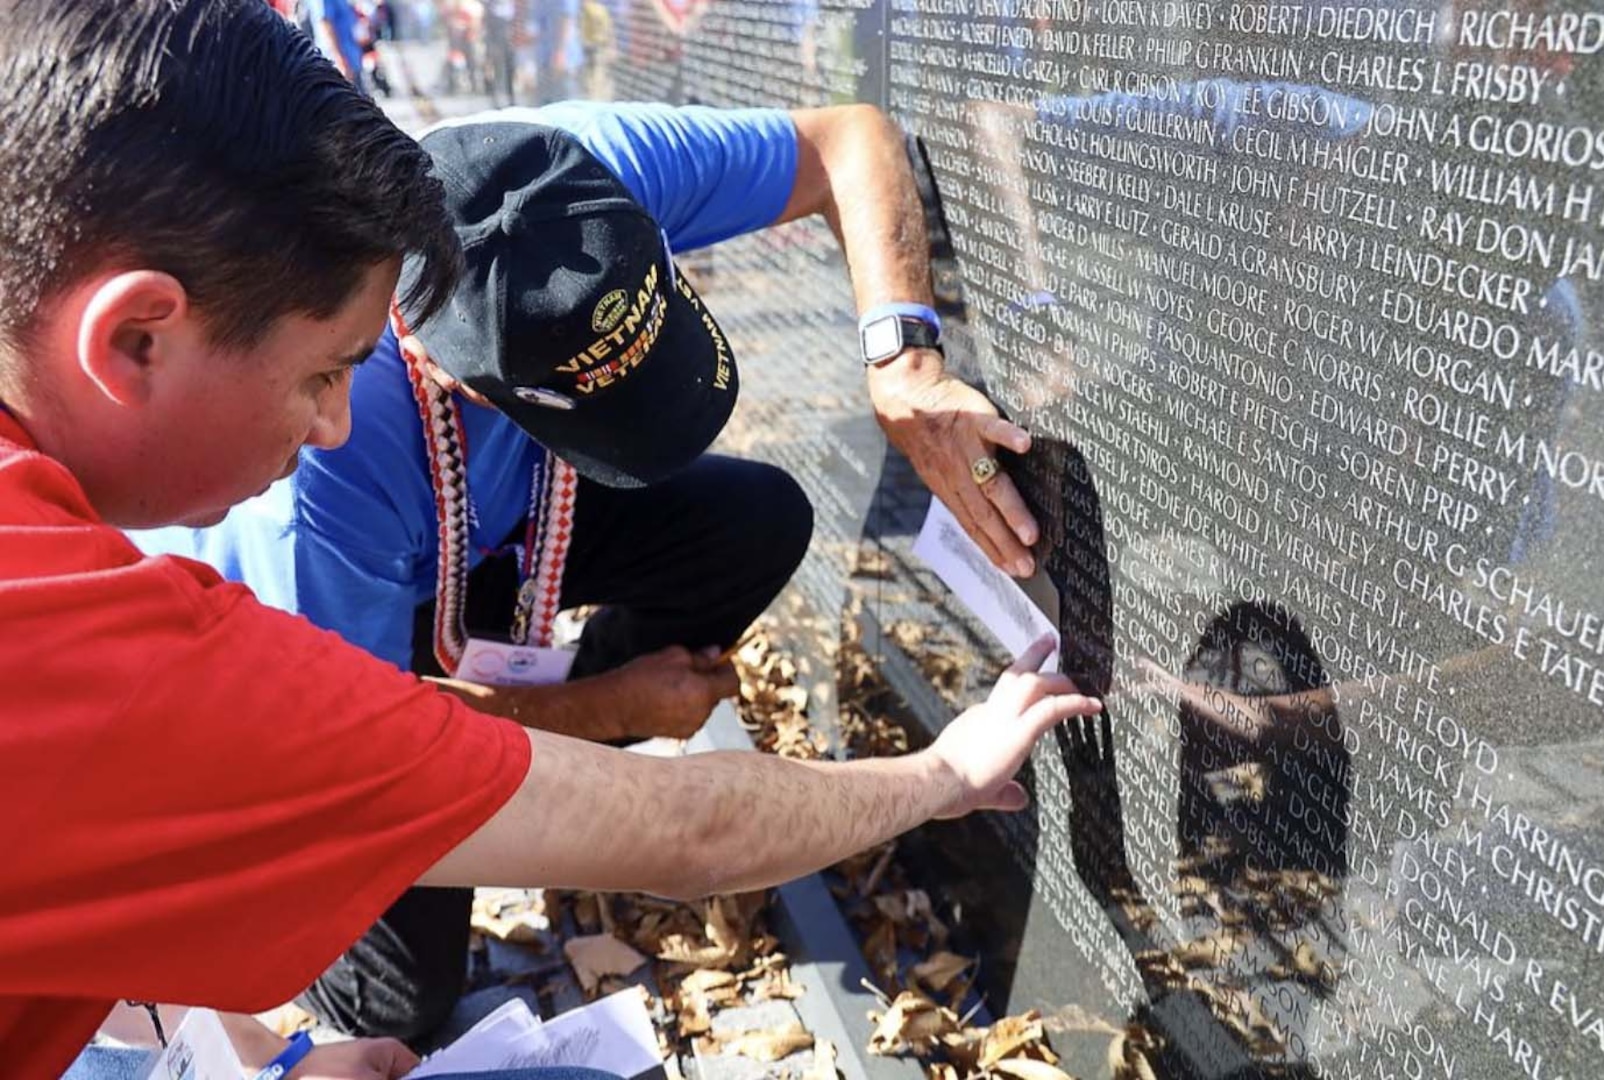 Arroyo and Martinez create a rubbing of a service member's name while visiting the Vietnam Veterans Memorial, Nov. 5, in Washington.